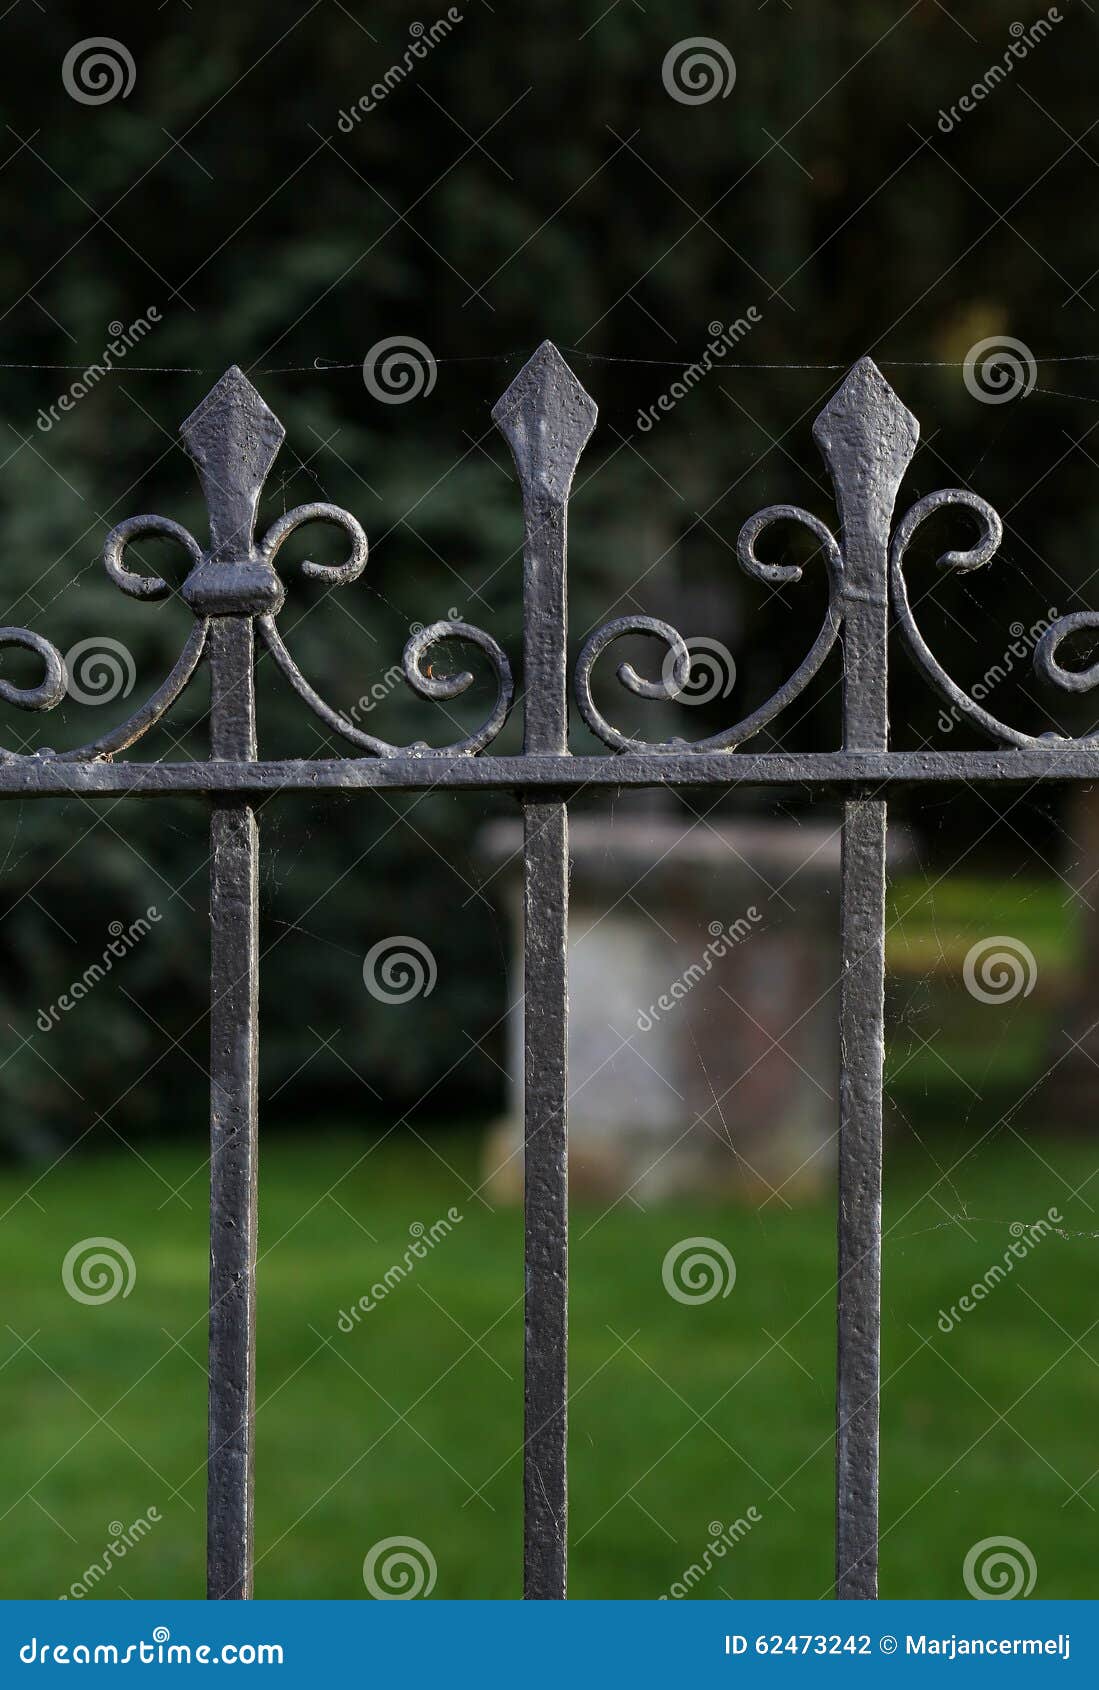 Black Metal Spiked Wrought Iron Fence Oxford Stock Photo - Image of ...